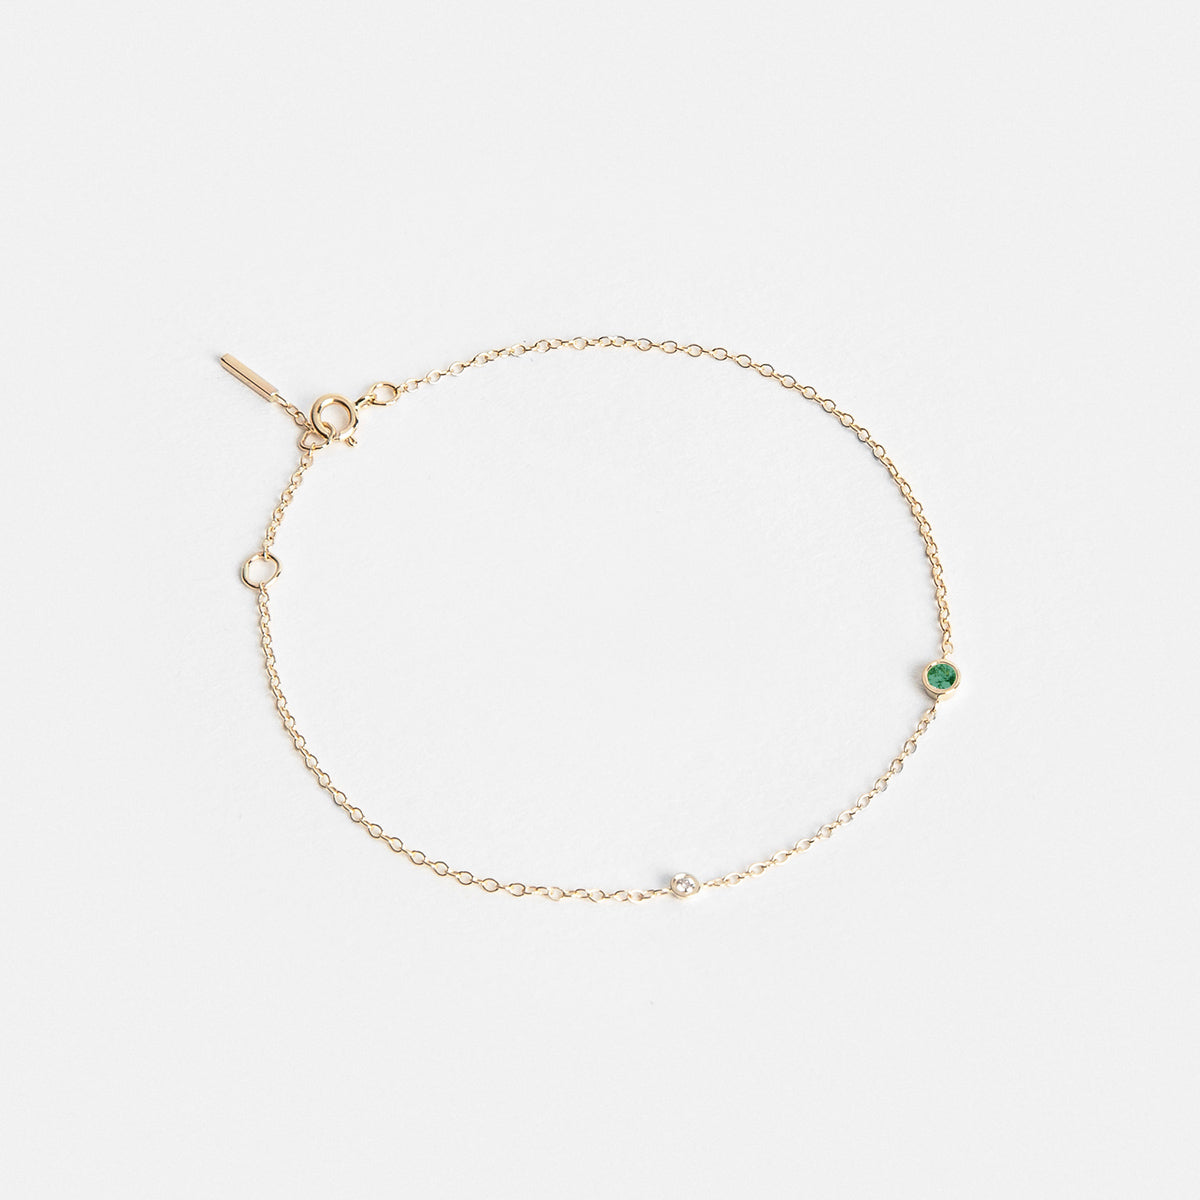 Iba Delicate Bracelet in 14k Gold set with Precious stones By SHW Fine Jewelry NYC